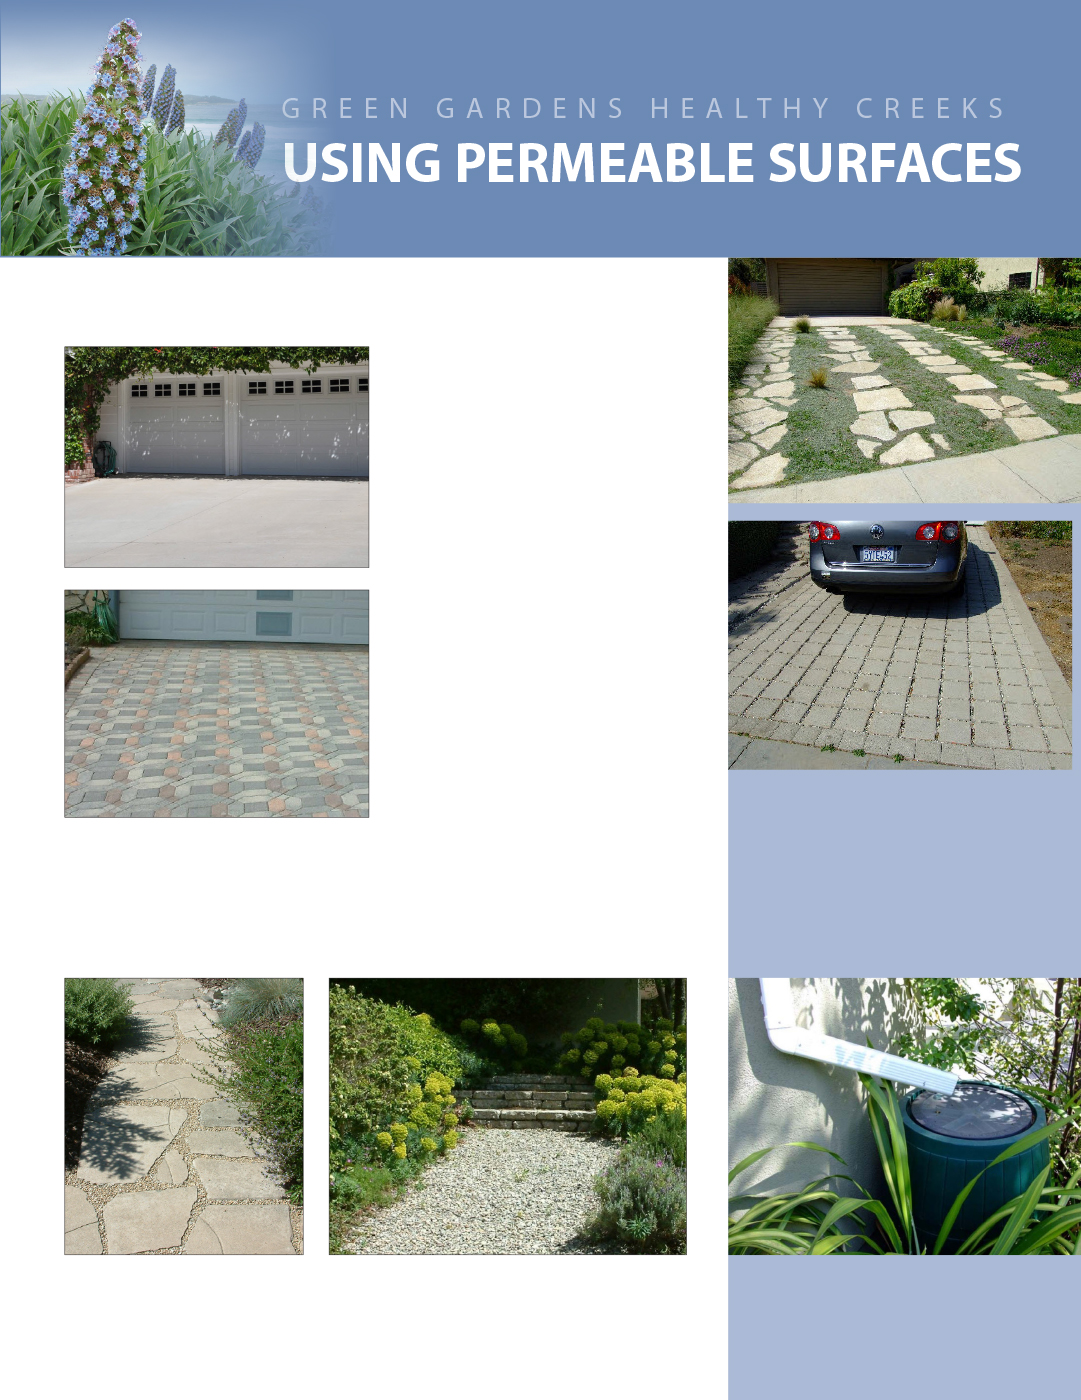 USING PERMEABLE SURFACES